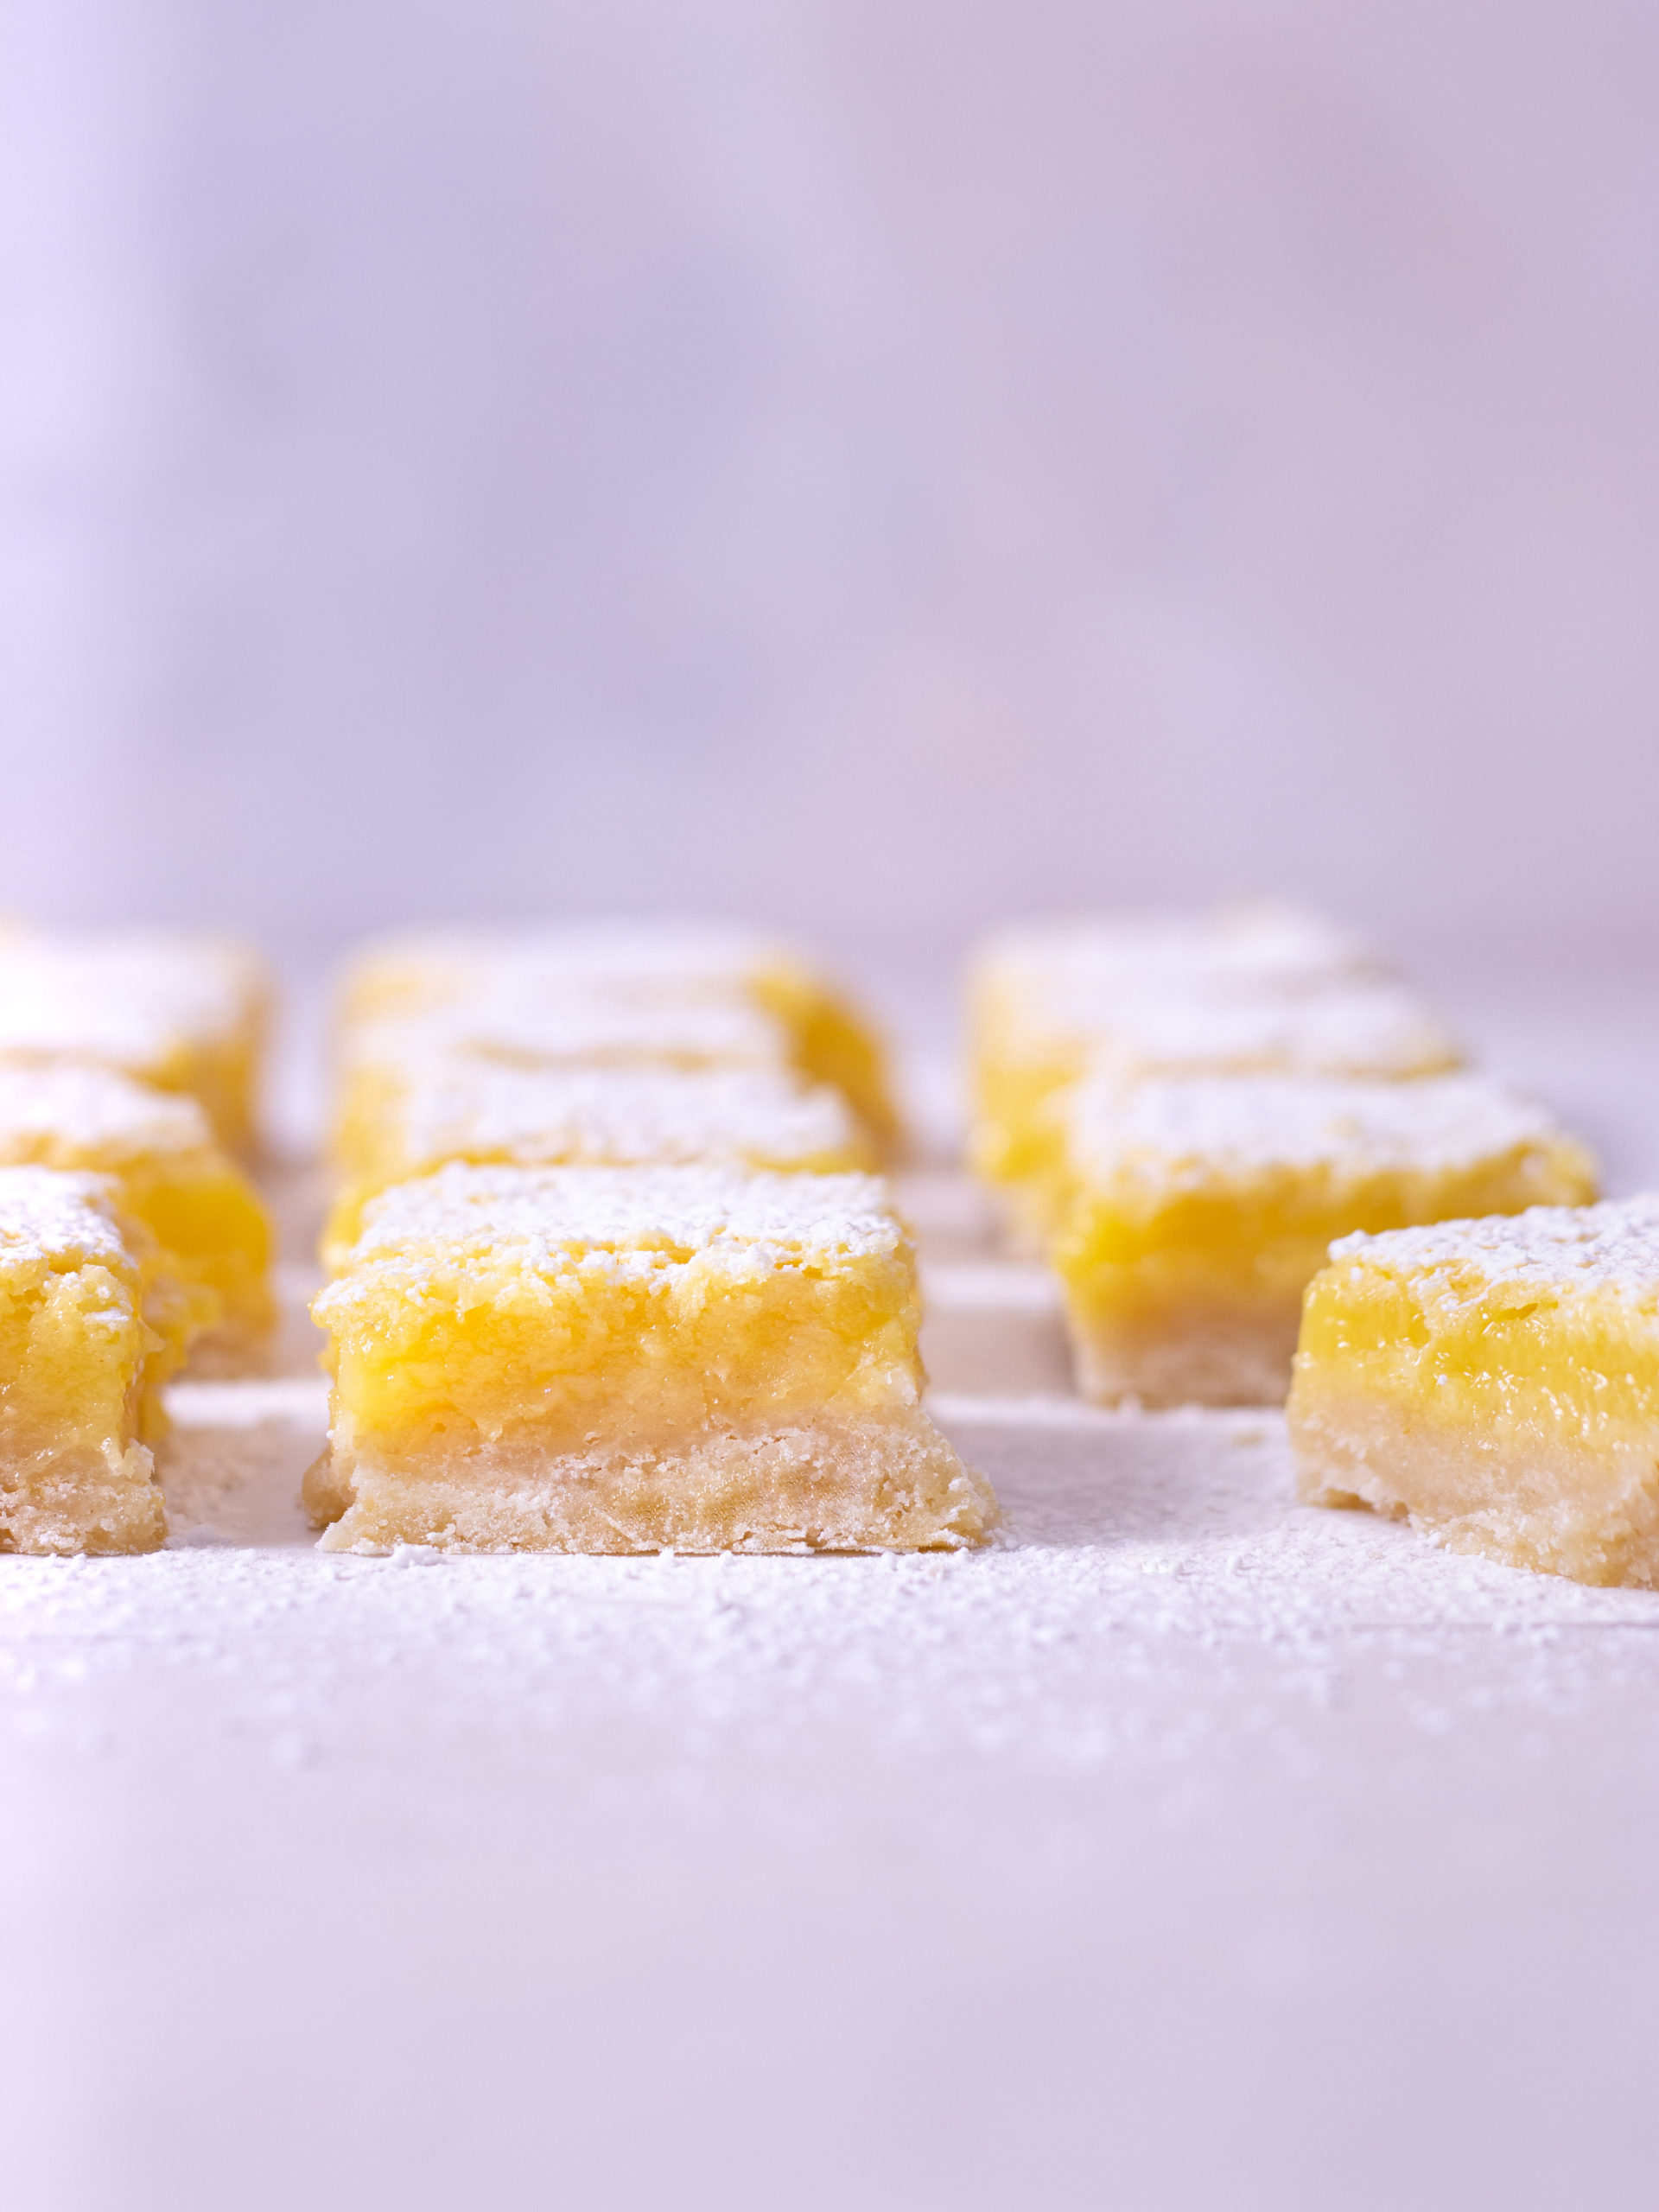 Straight on shot of rows of lemon bars on a light surface.